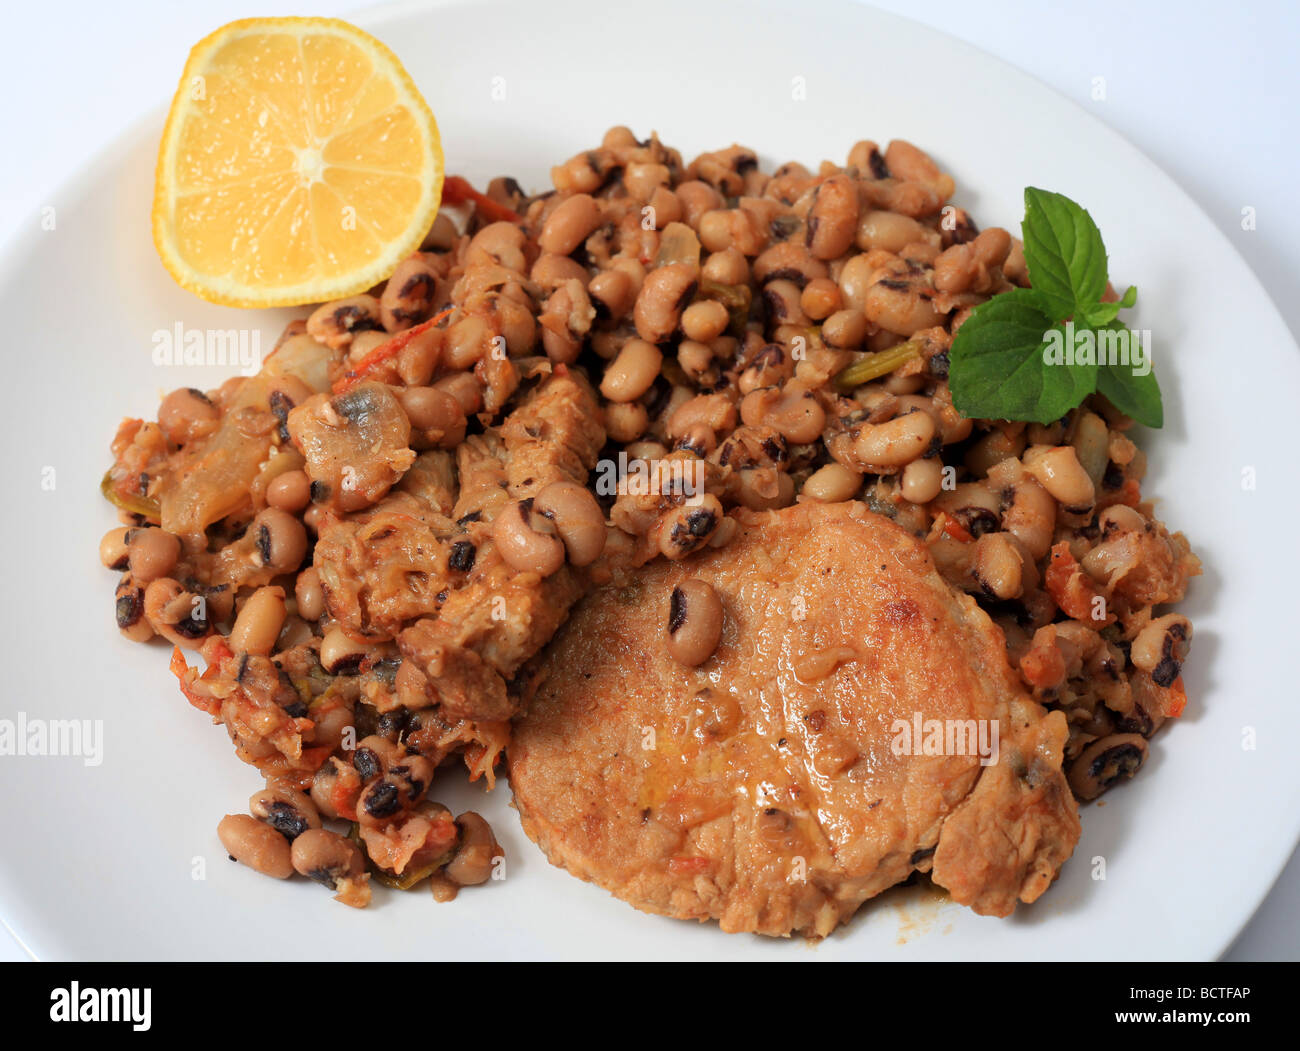 A meal of pork cooked with black eyed beans tomato celery onions and olive oil a traditional Greek recipe Stock Photo